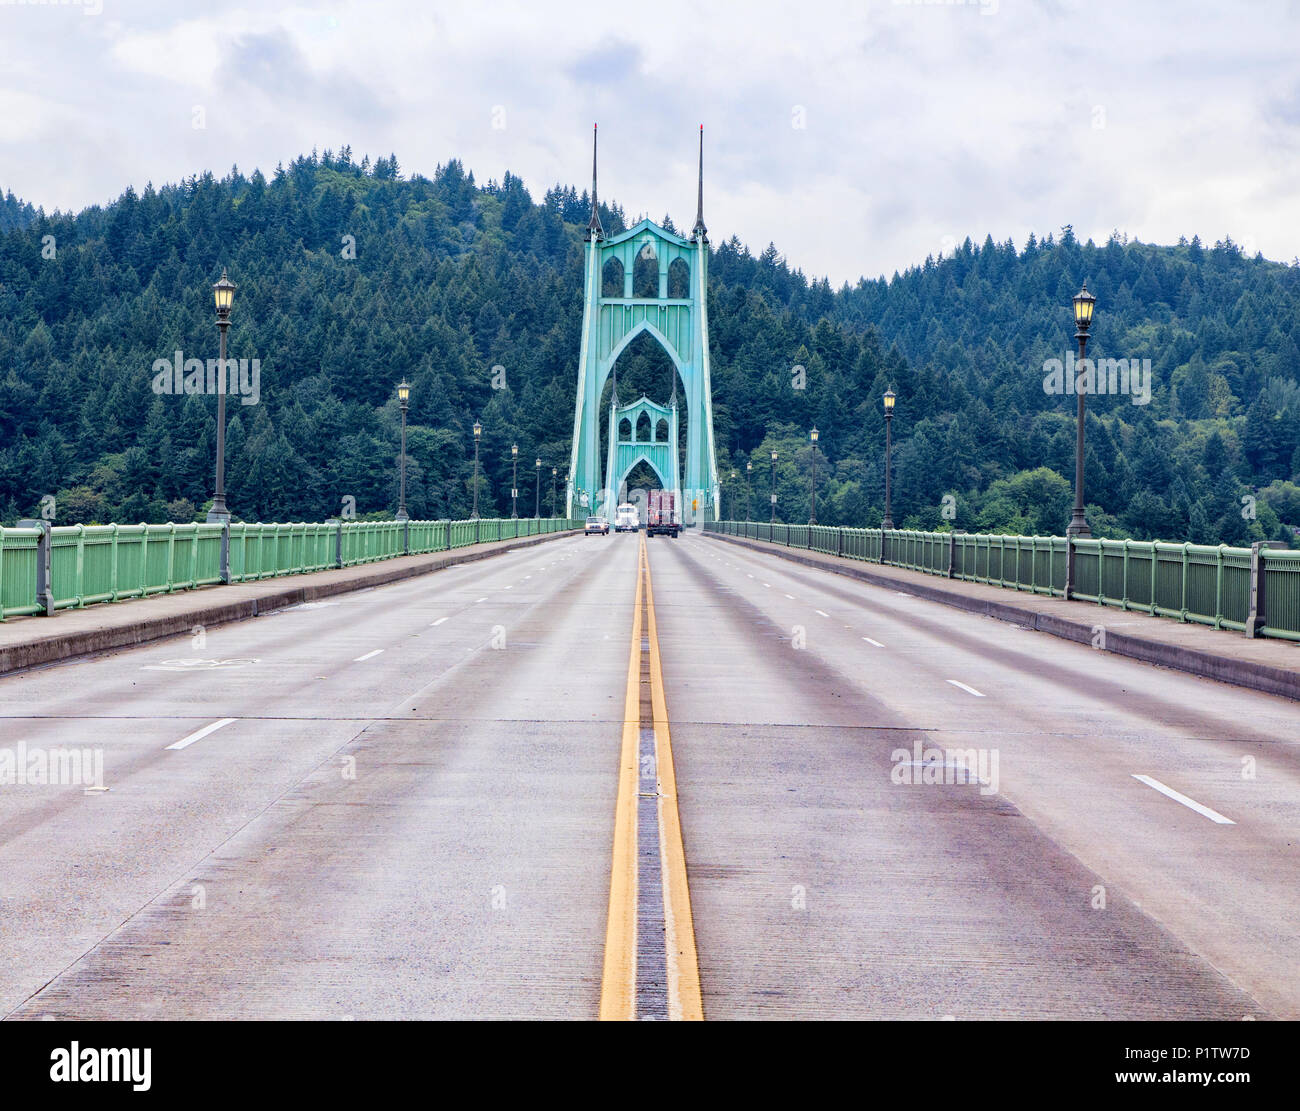 Middle of the road view of the St Johns Bridge, Portland Oregon, USA Stock Photo